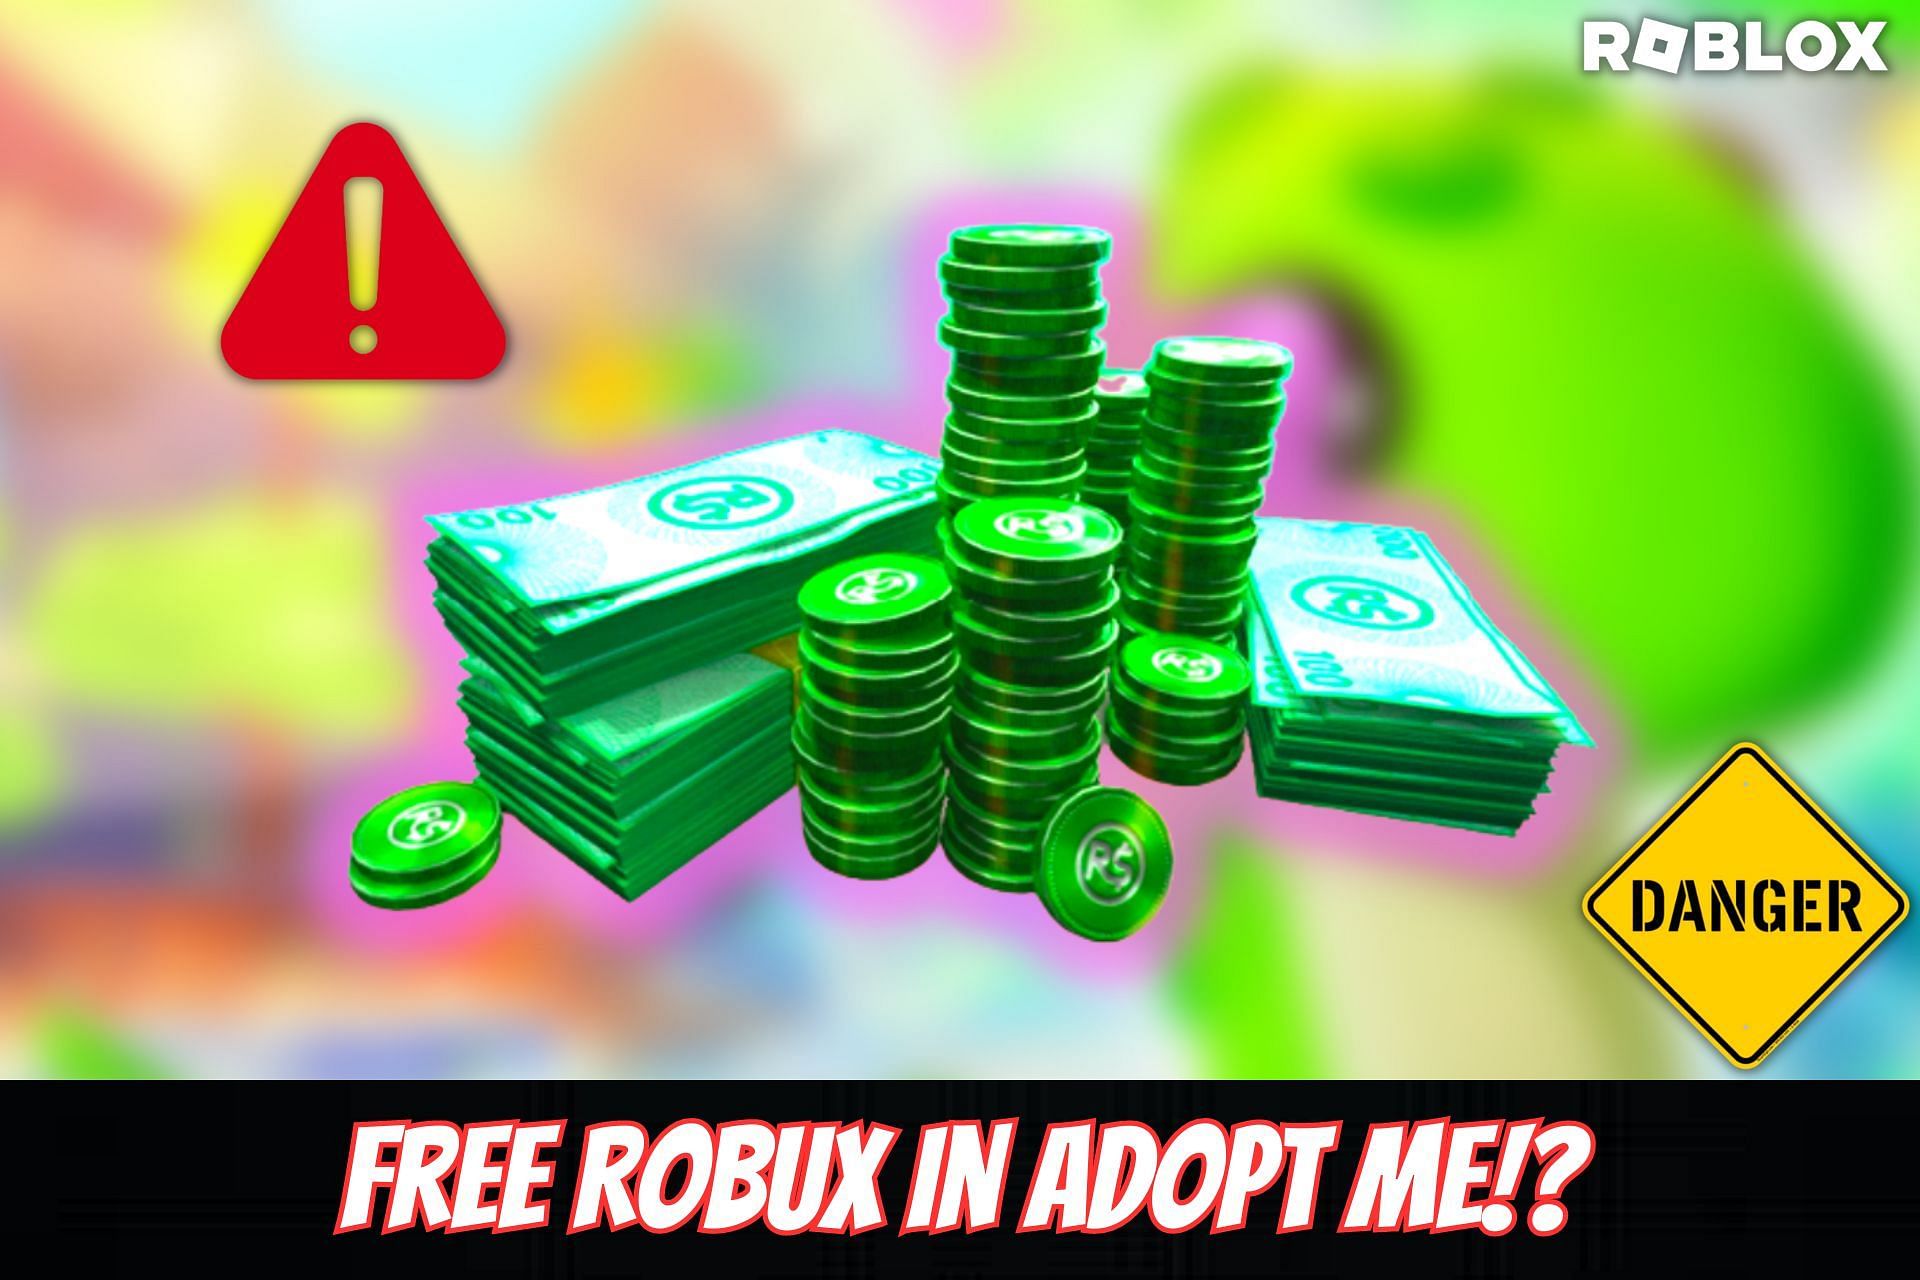 Can you get free Robux in Roblox Adopt Me!?